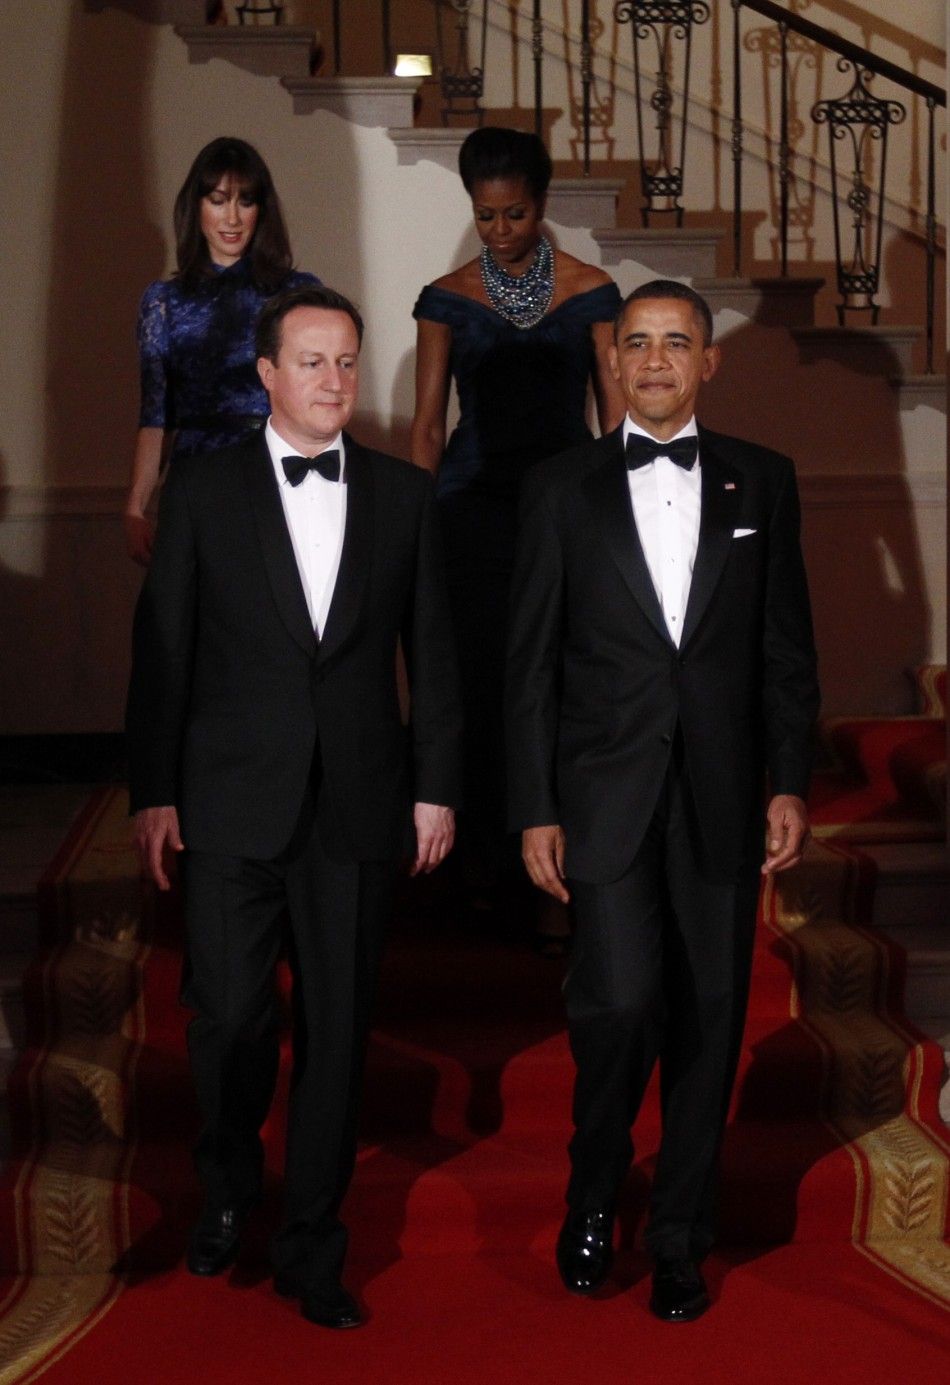 U.S. President Barack Obama front R and and first lady Michelle back R welcome British Prime Minister David Cameron and his wife Samantha to the White House for the State Dinner in Washington March 14, 2012.